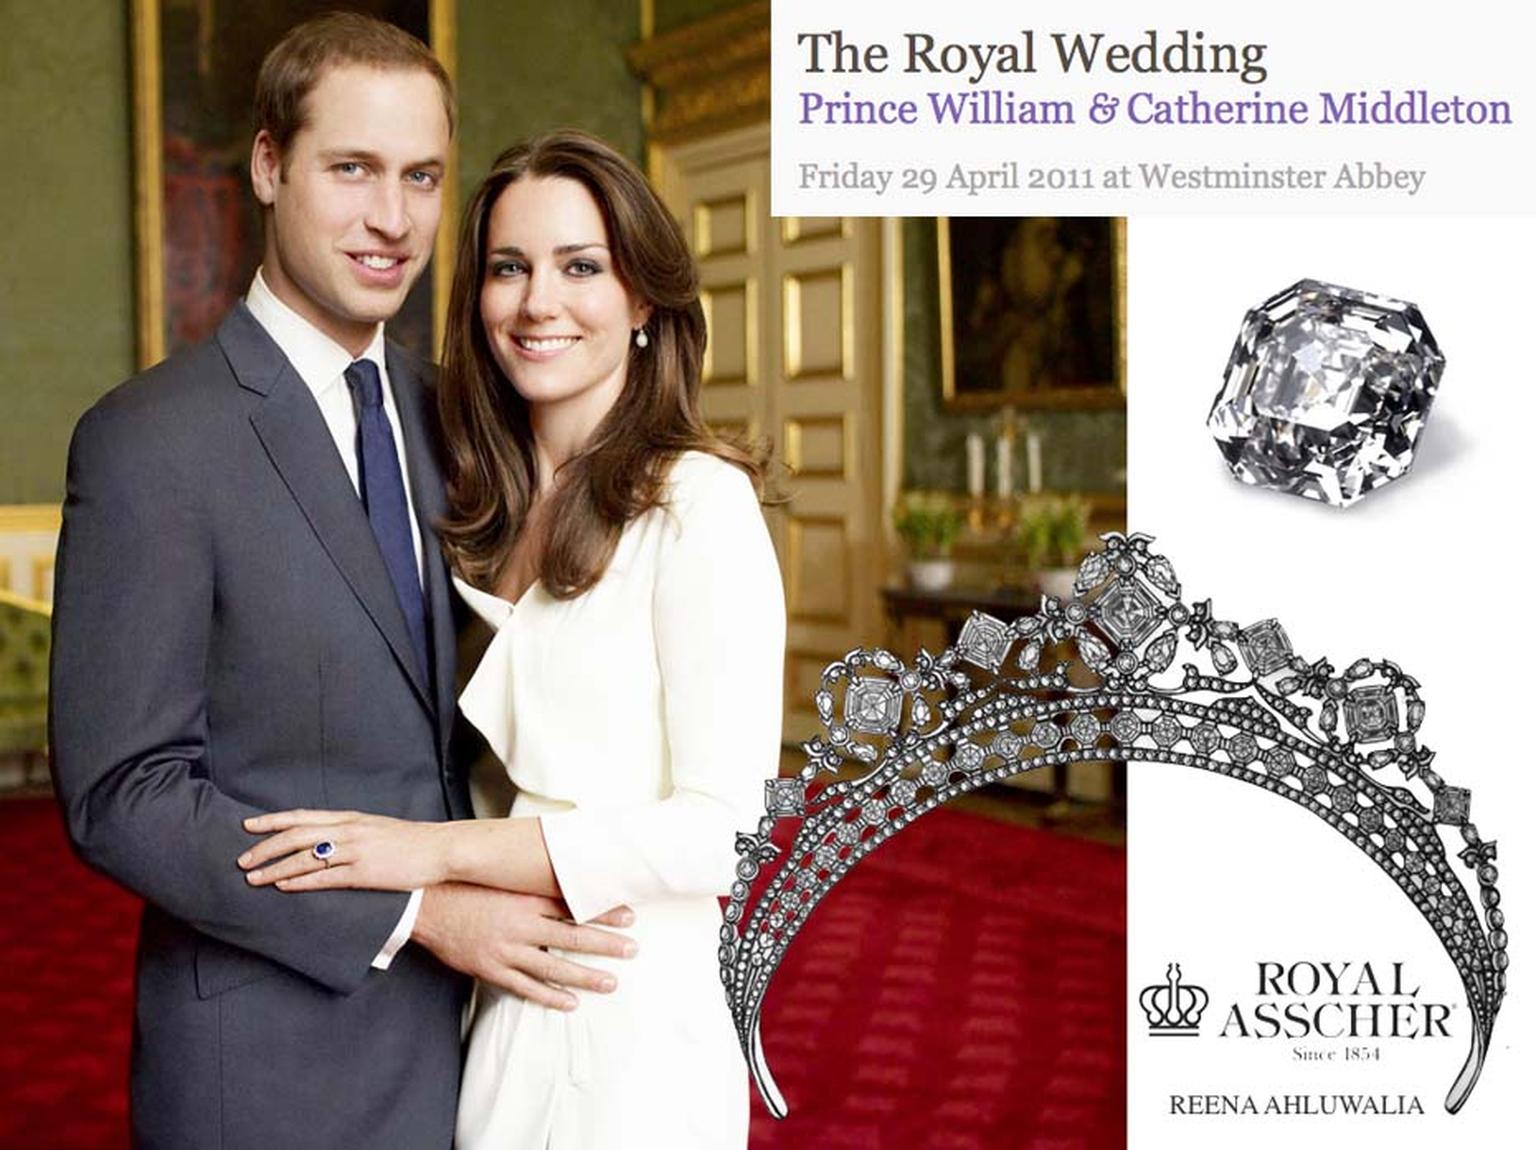 In 2011, Reena Ahluwalia designed a tiara for Kate Middleton set with Royal Asscher-cut diamonds as a tribute to the Royal Wedding.